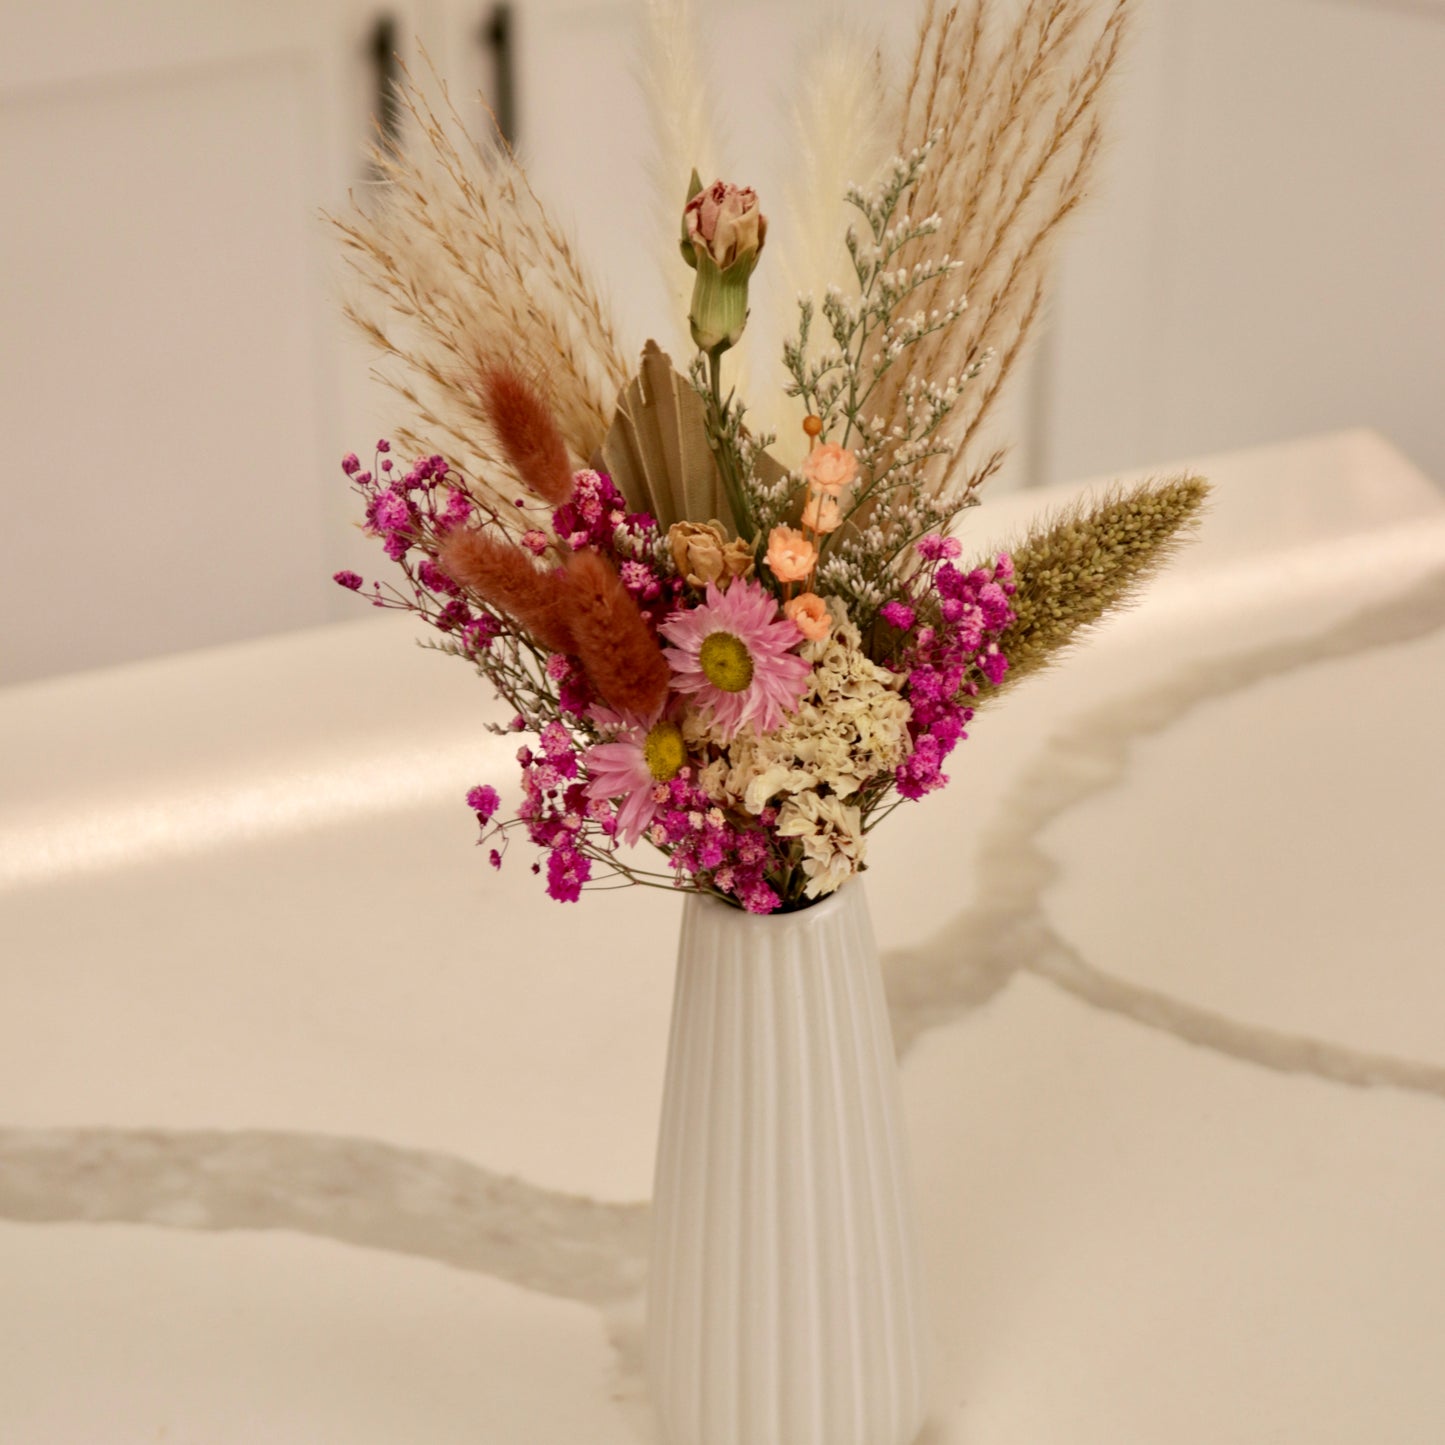 Small Dried Floral Arrangements